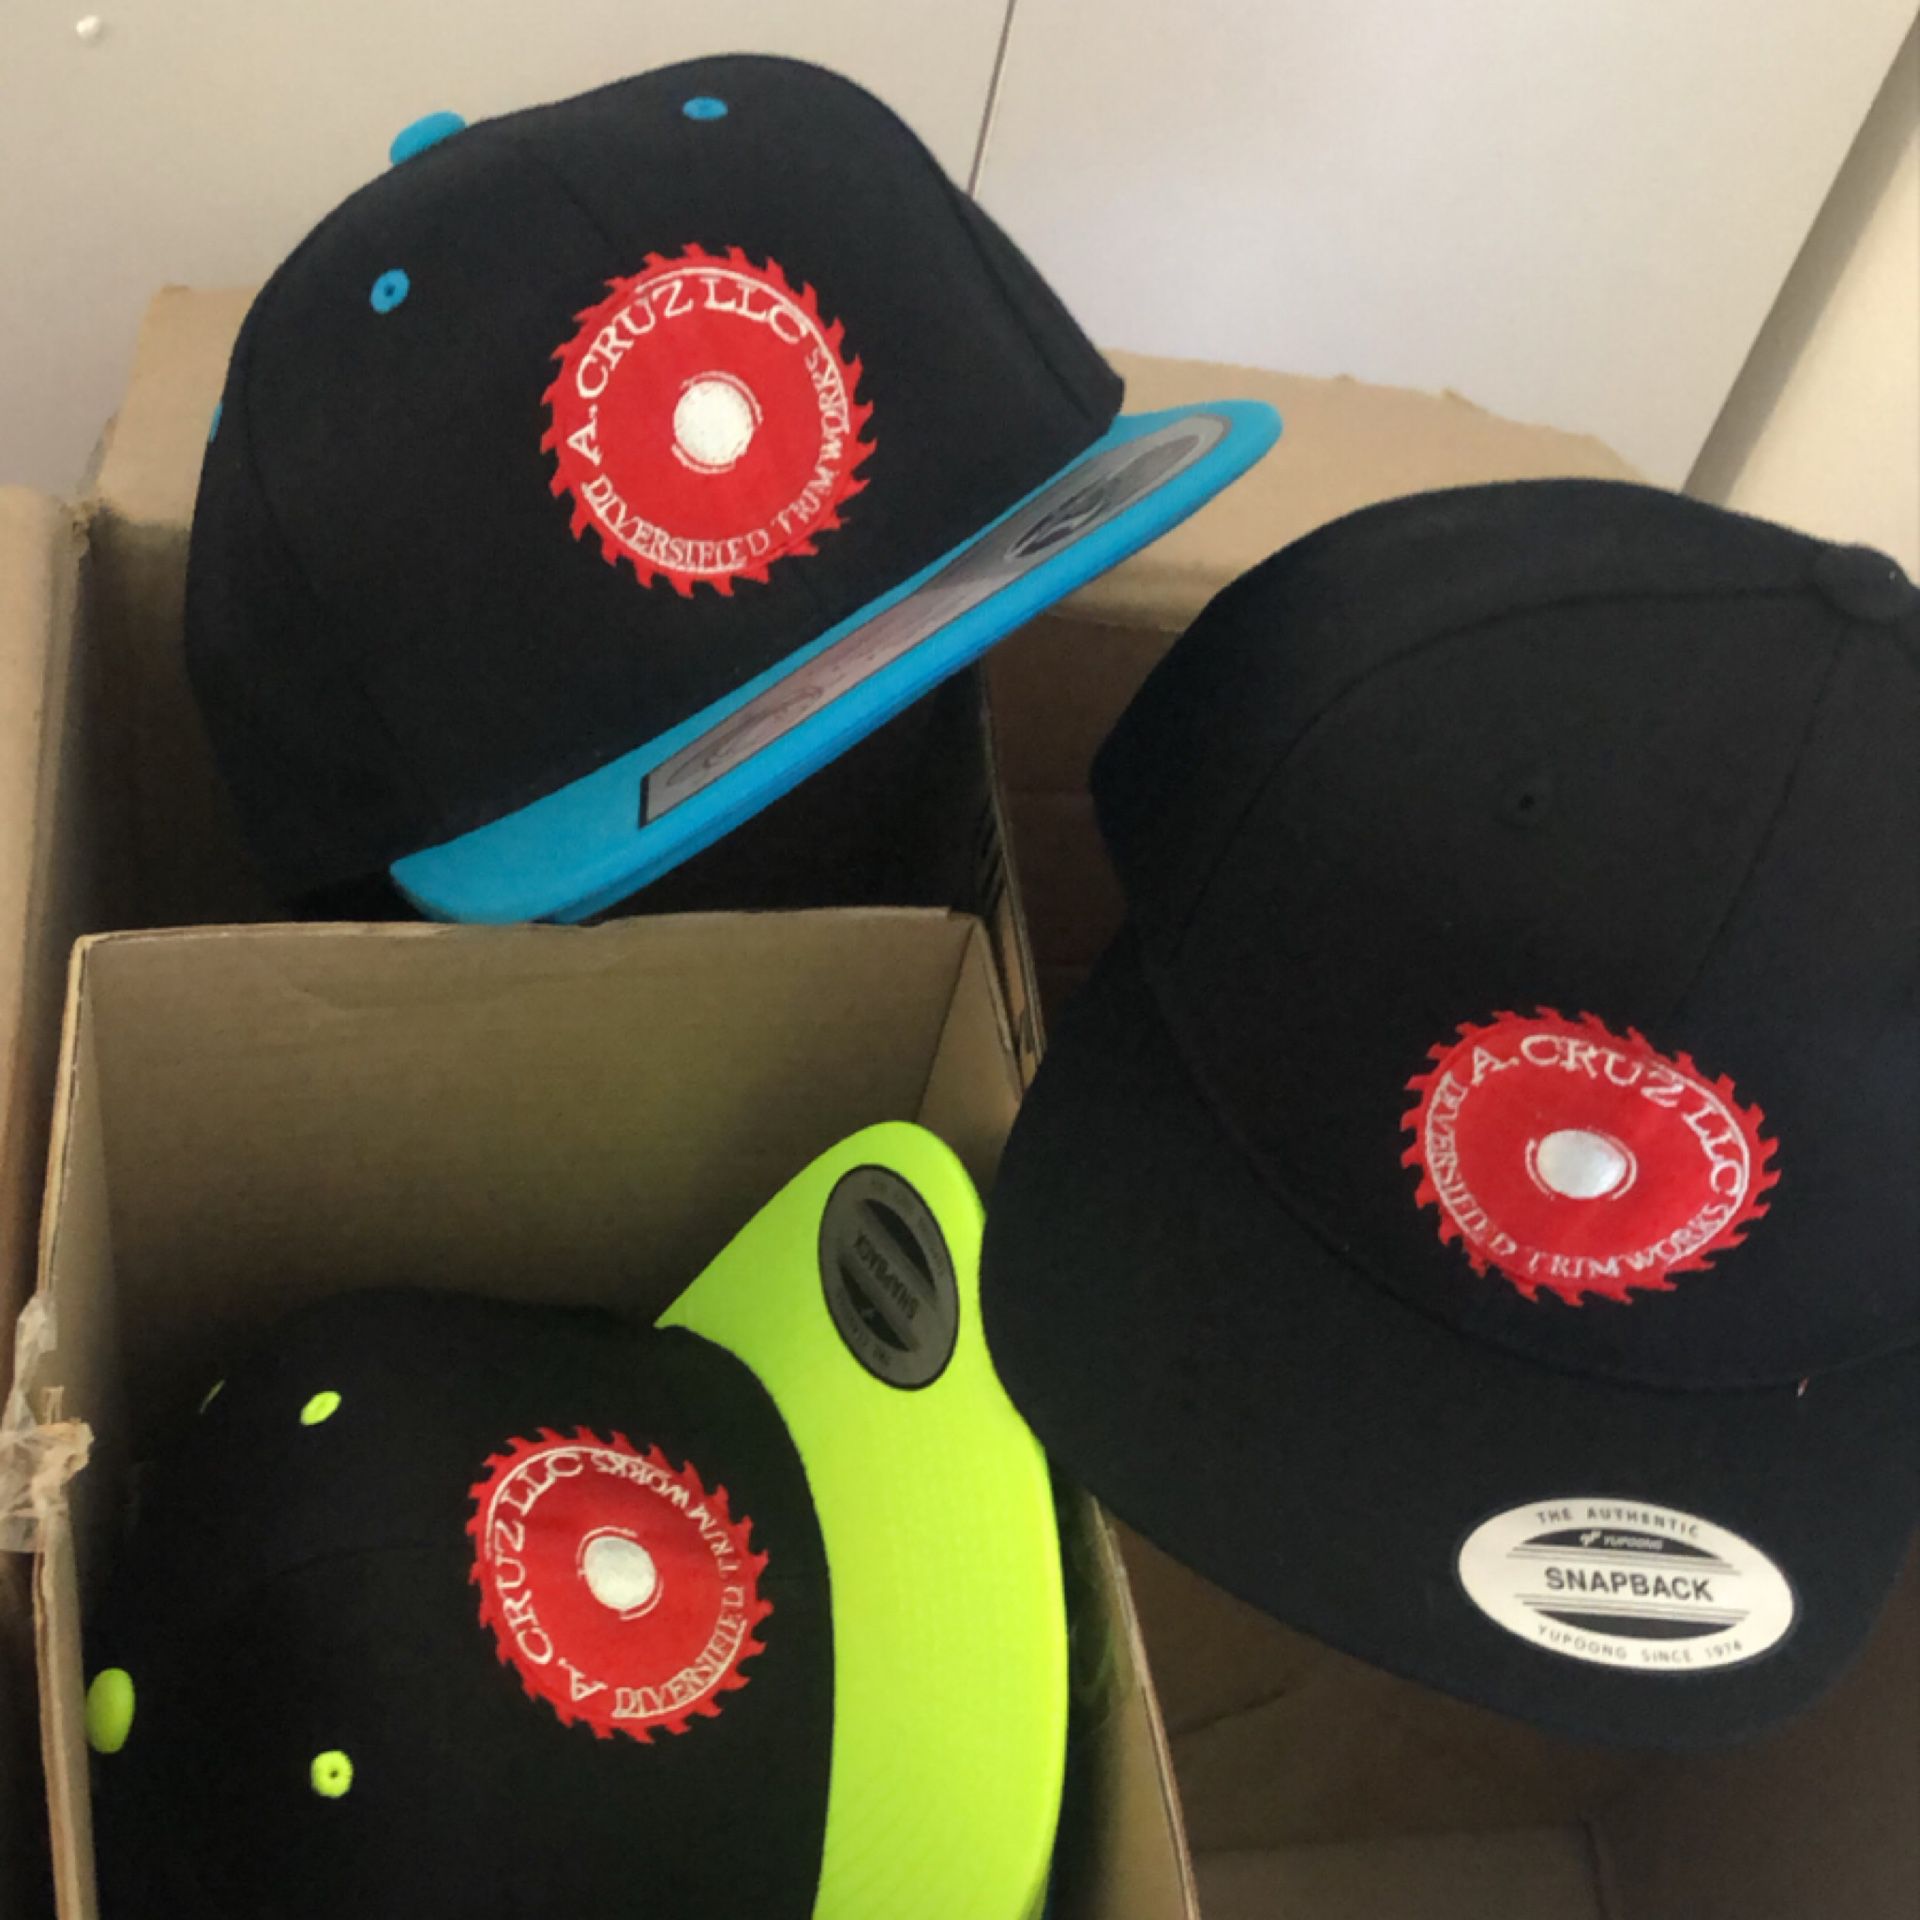 12 Custom Embroidered Snapbacks with your Logo $180 shipped